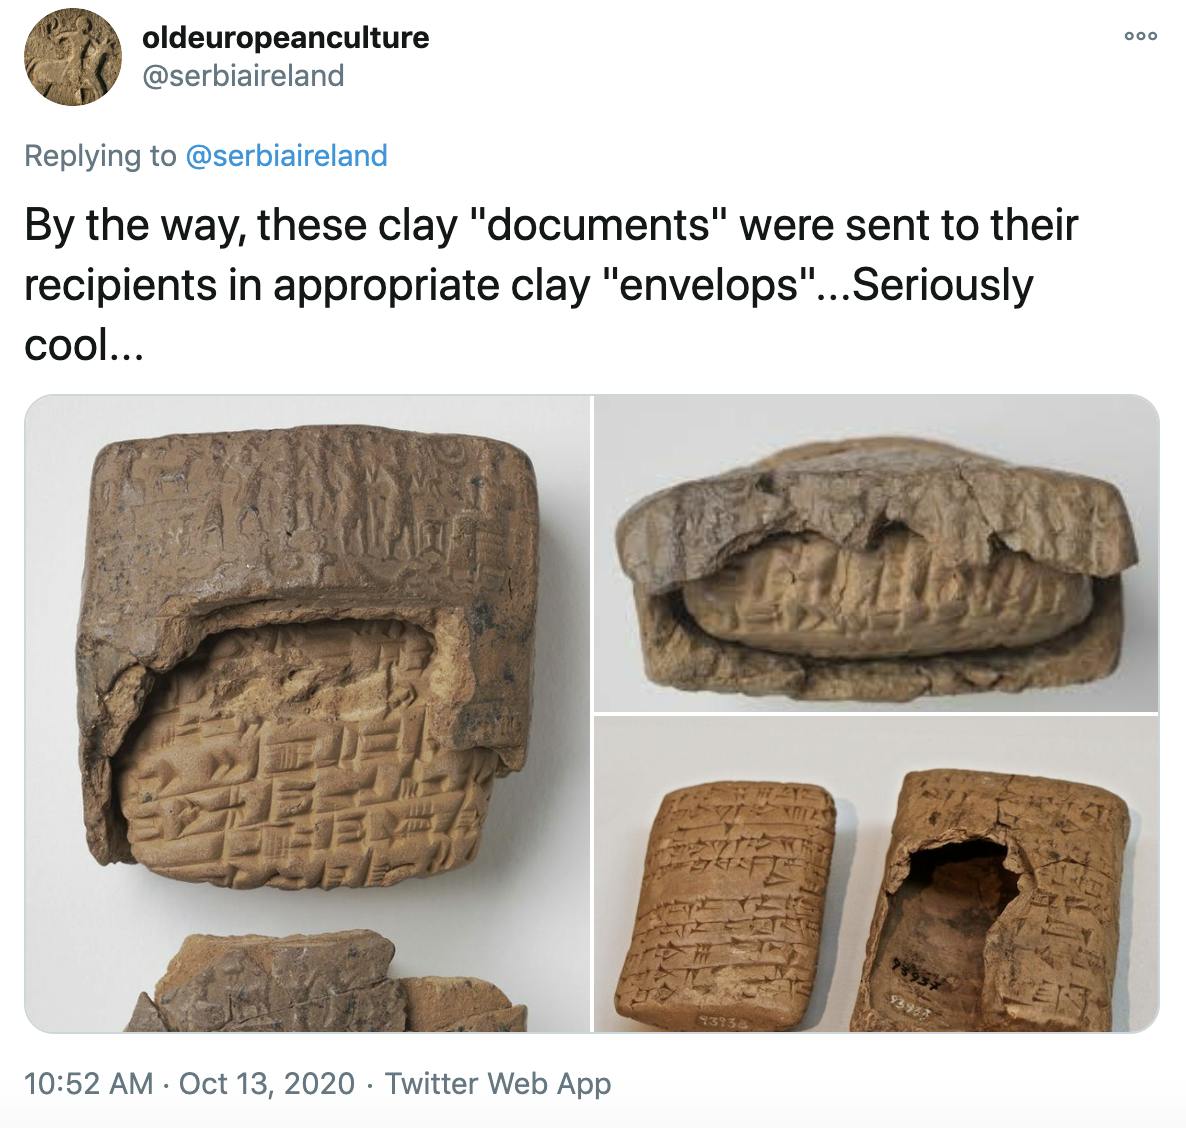 'By the way, these clay 'documents' were sent to their recipients in appropriate clay 'envelops'...Seriously cool...' picture of the tablets with their clay wrappers half cracked off to show the tablet inside